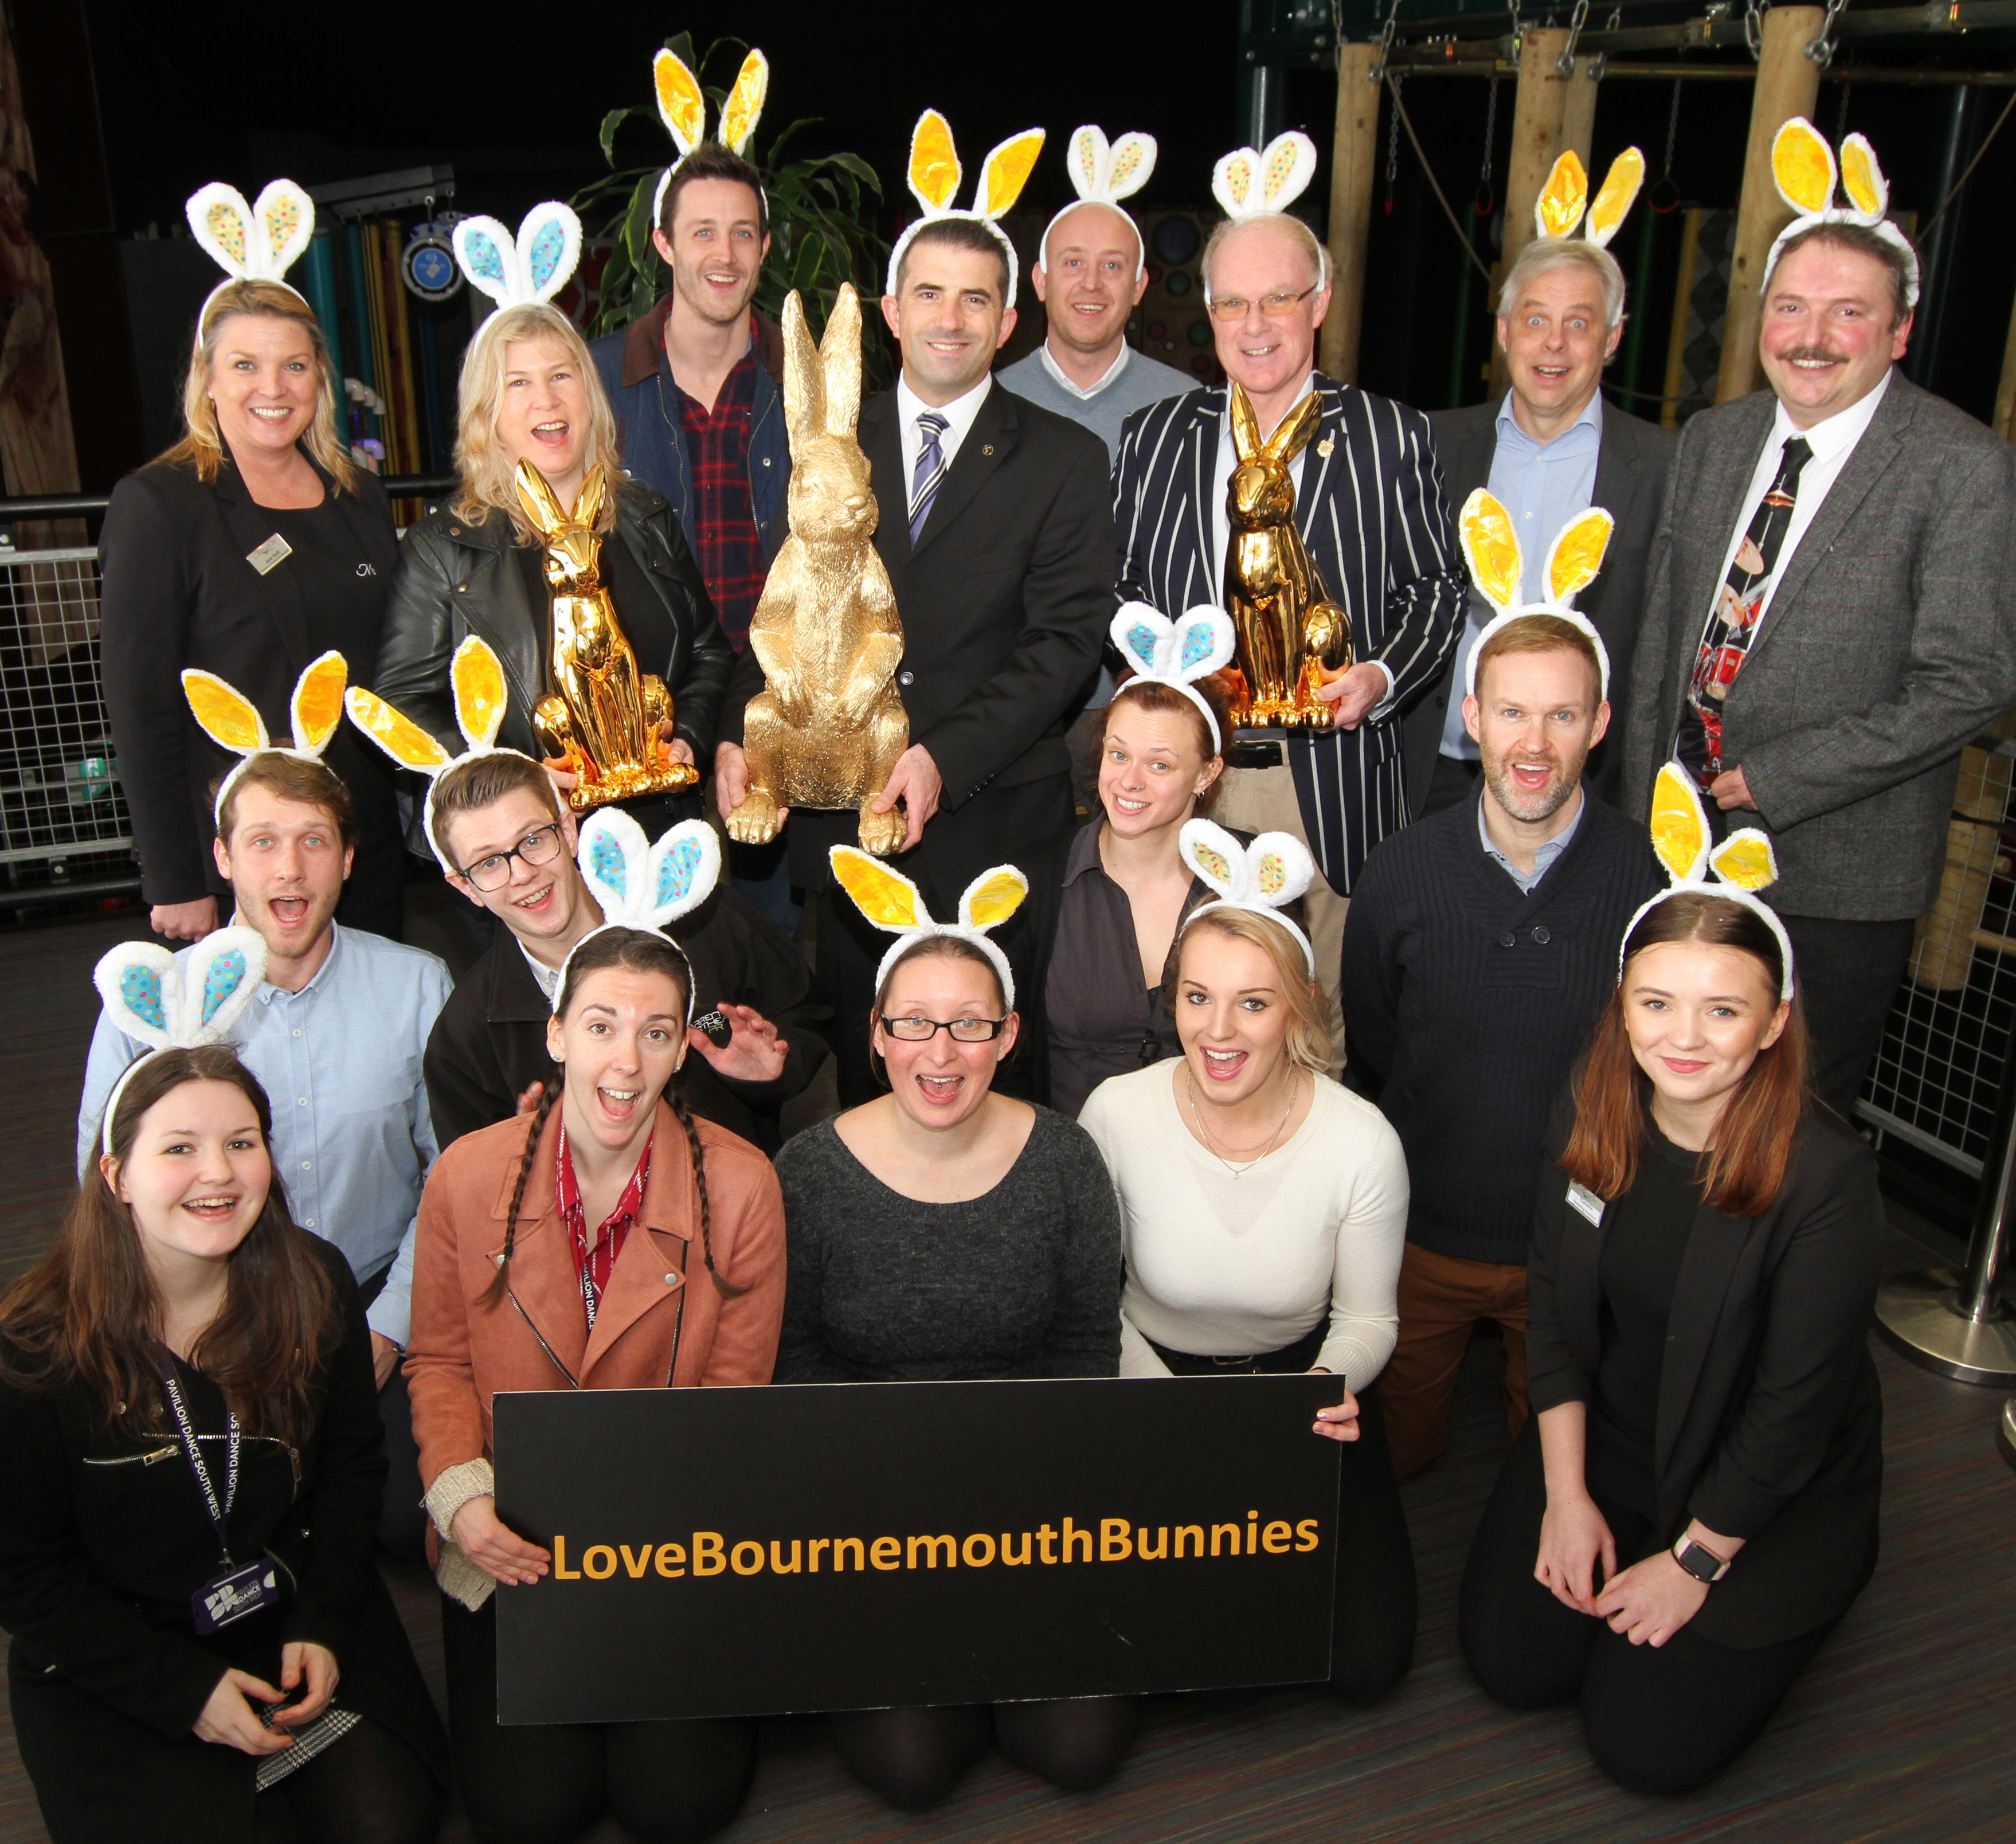 photograph by Hattie Miles ... 14.03.2018 ... Members of the Bournemouth business community join Coastal BID to launch Love Bournemouth Bunnies.